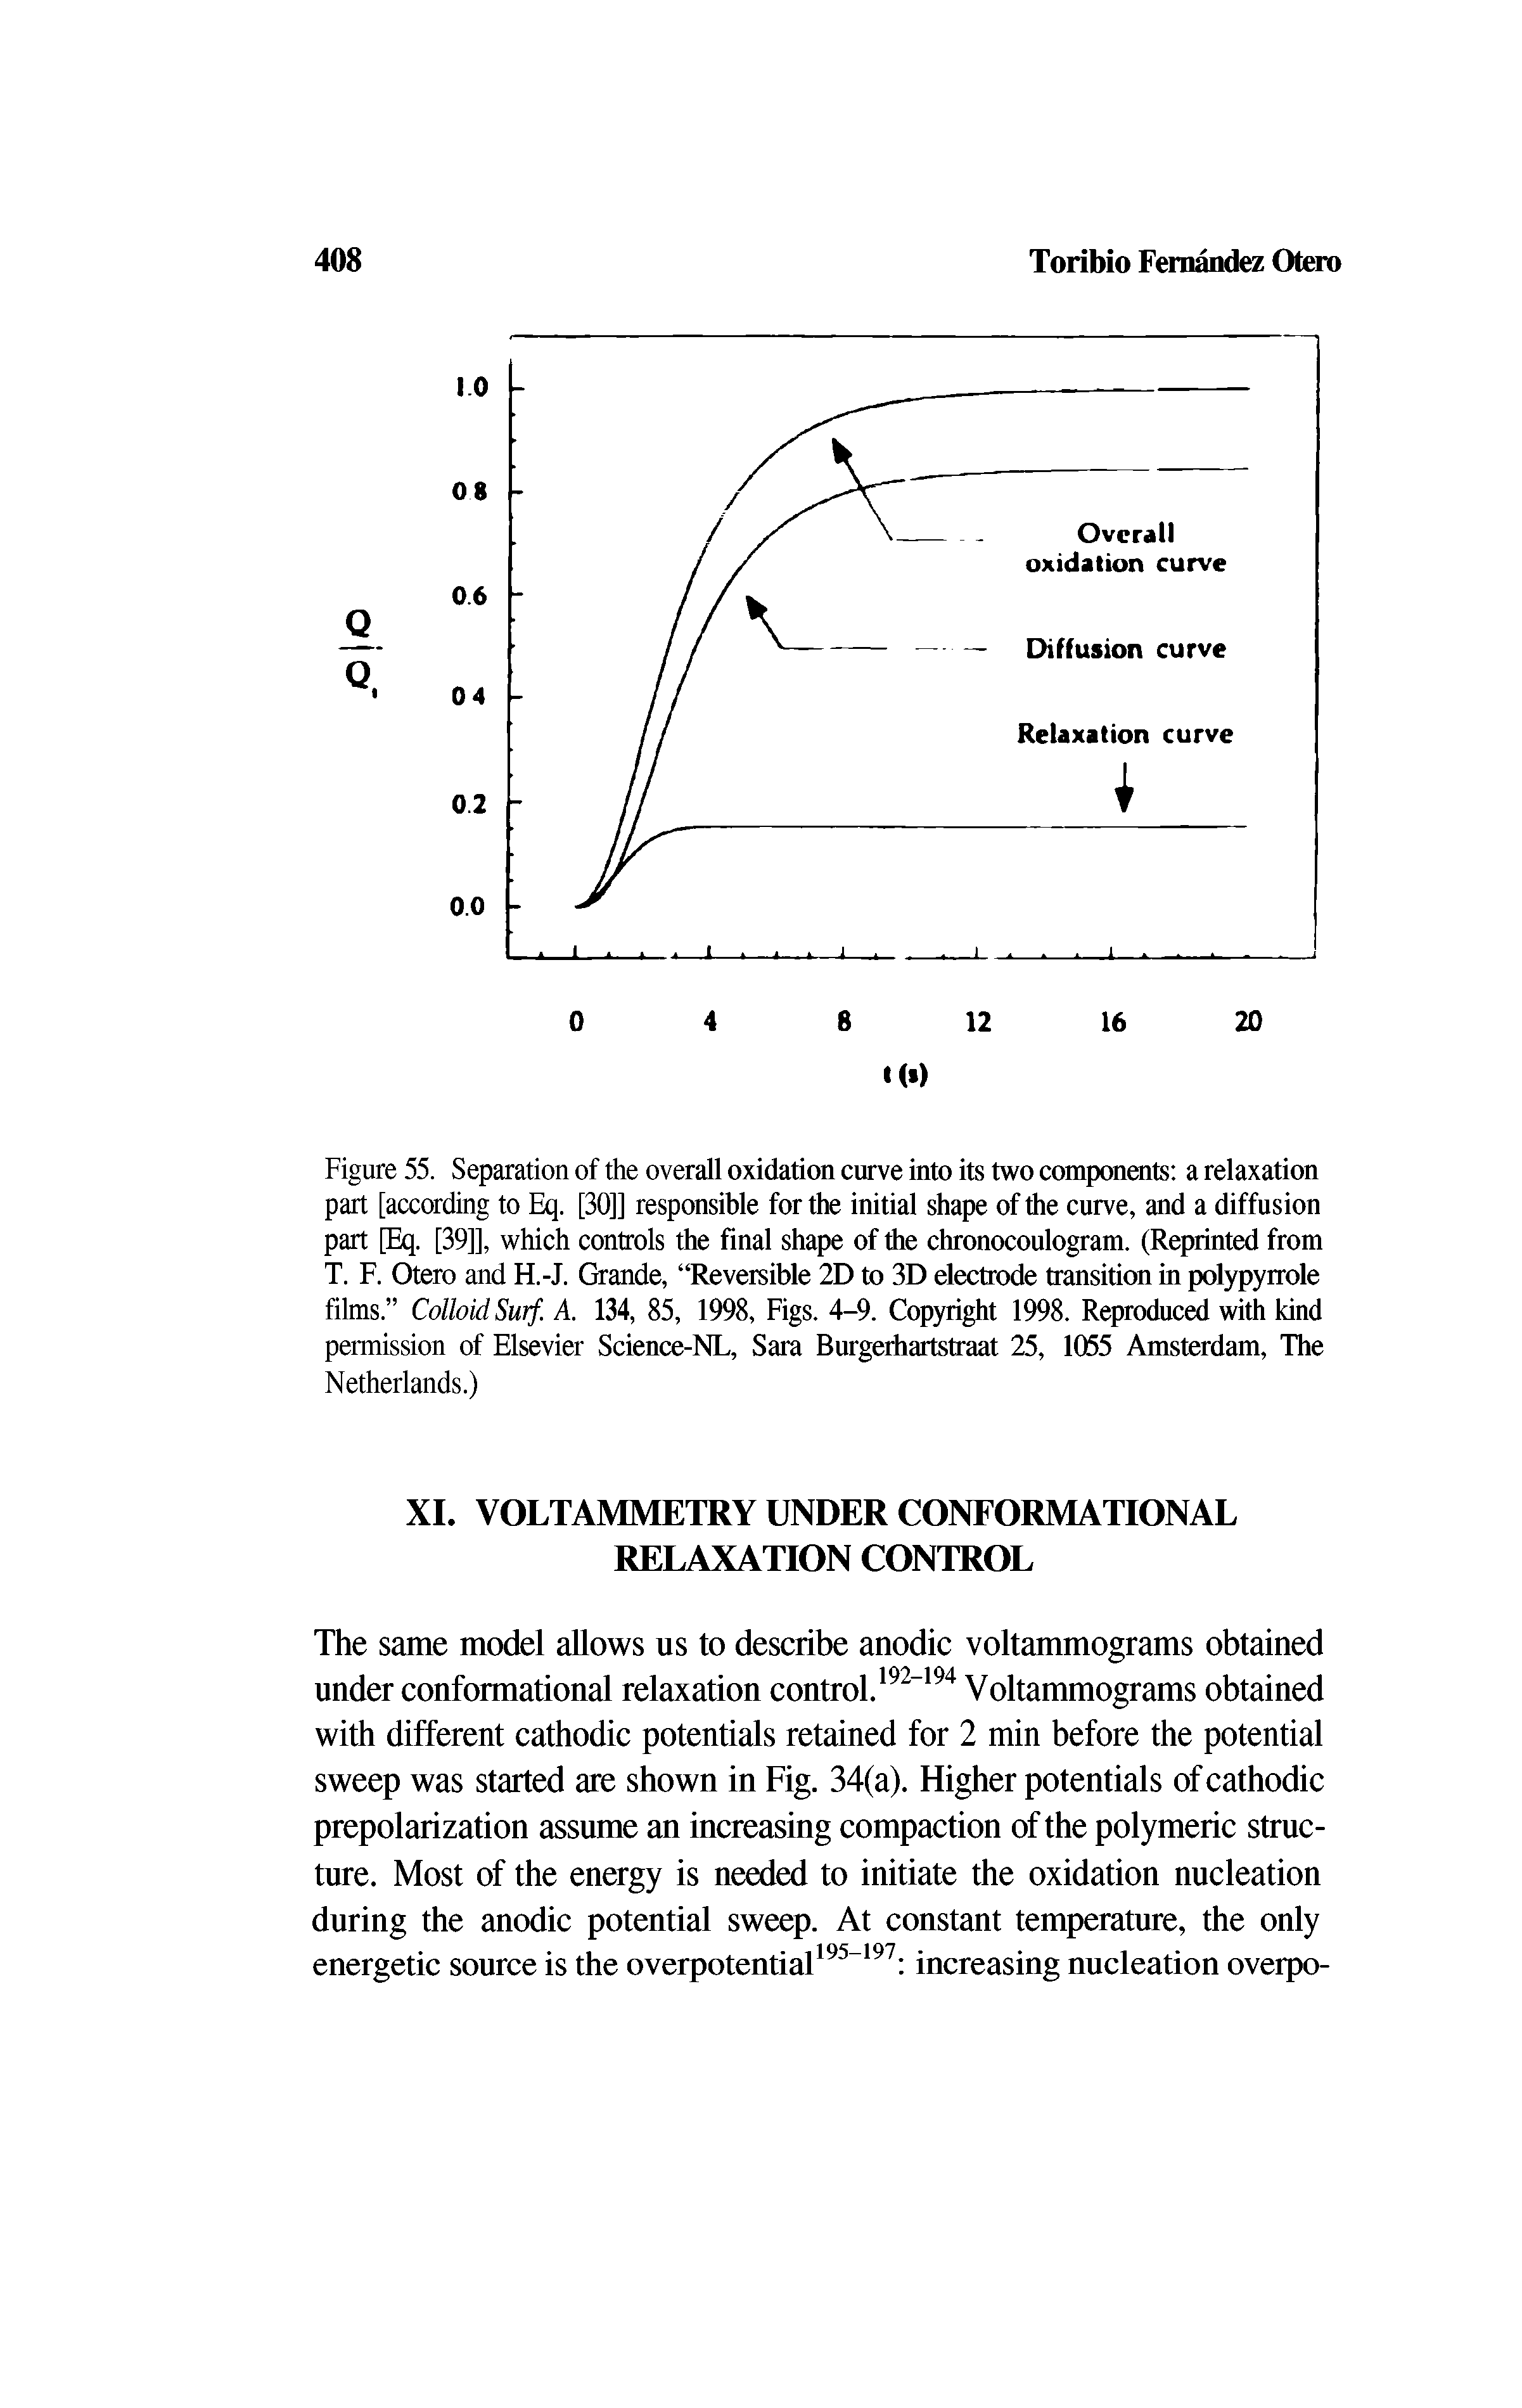 Figure 55. Separation of the overall oxidation curve into its two components a relaxation part [according to Eq. [30]] responsible for the initial shape of the curve, and a diffusion part [Eq. [39]], which controls the final shape of the chronocoulogram. (Reprinted from T. F. Otero and H.-J. Grande, Reversible 2D to 3D electrode transition in polypyrrole films. Colloid Surf. A. 134, 85, 1998, Figs. 4-9. Copyright 1998. Reproduced with kind permission of Elsevier Science-NL, Sara Burgerhartstraat 25, 1055 Amsterdam, The Netherlands.)...